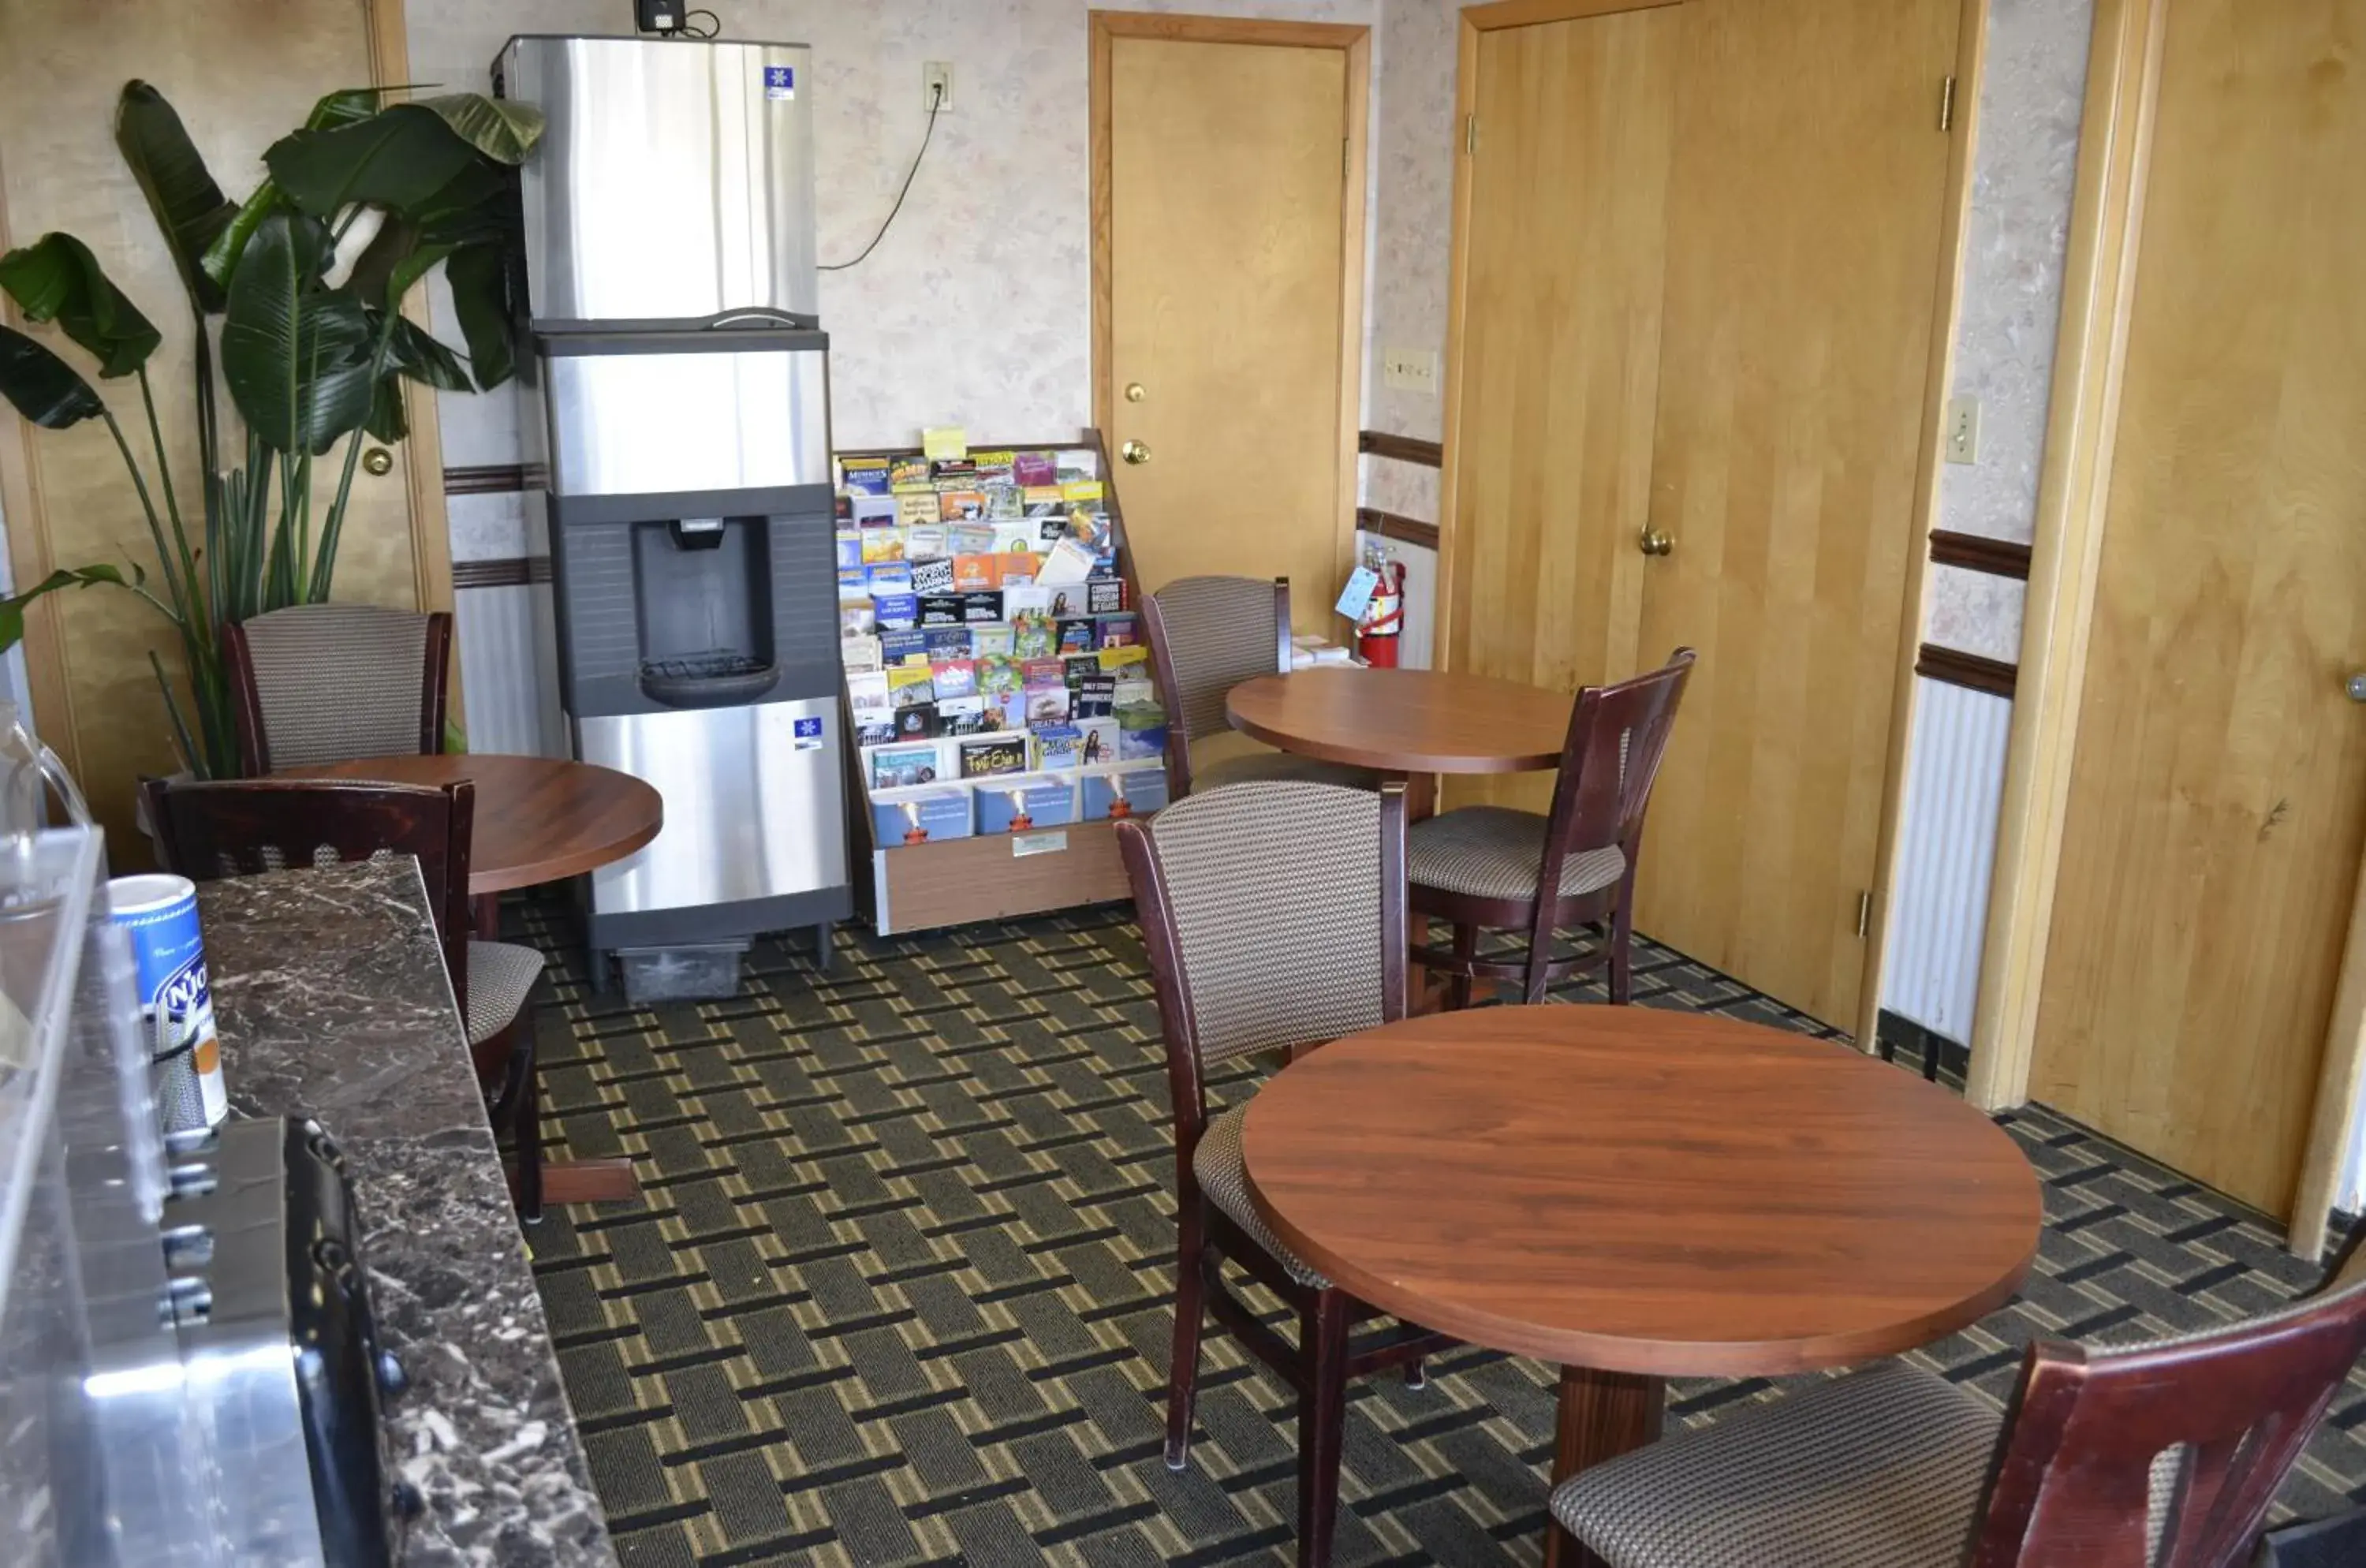 Area and facilities in Budget Inn Williamsville